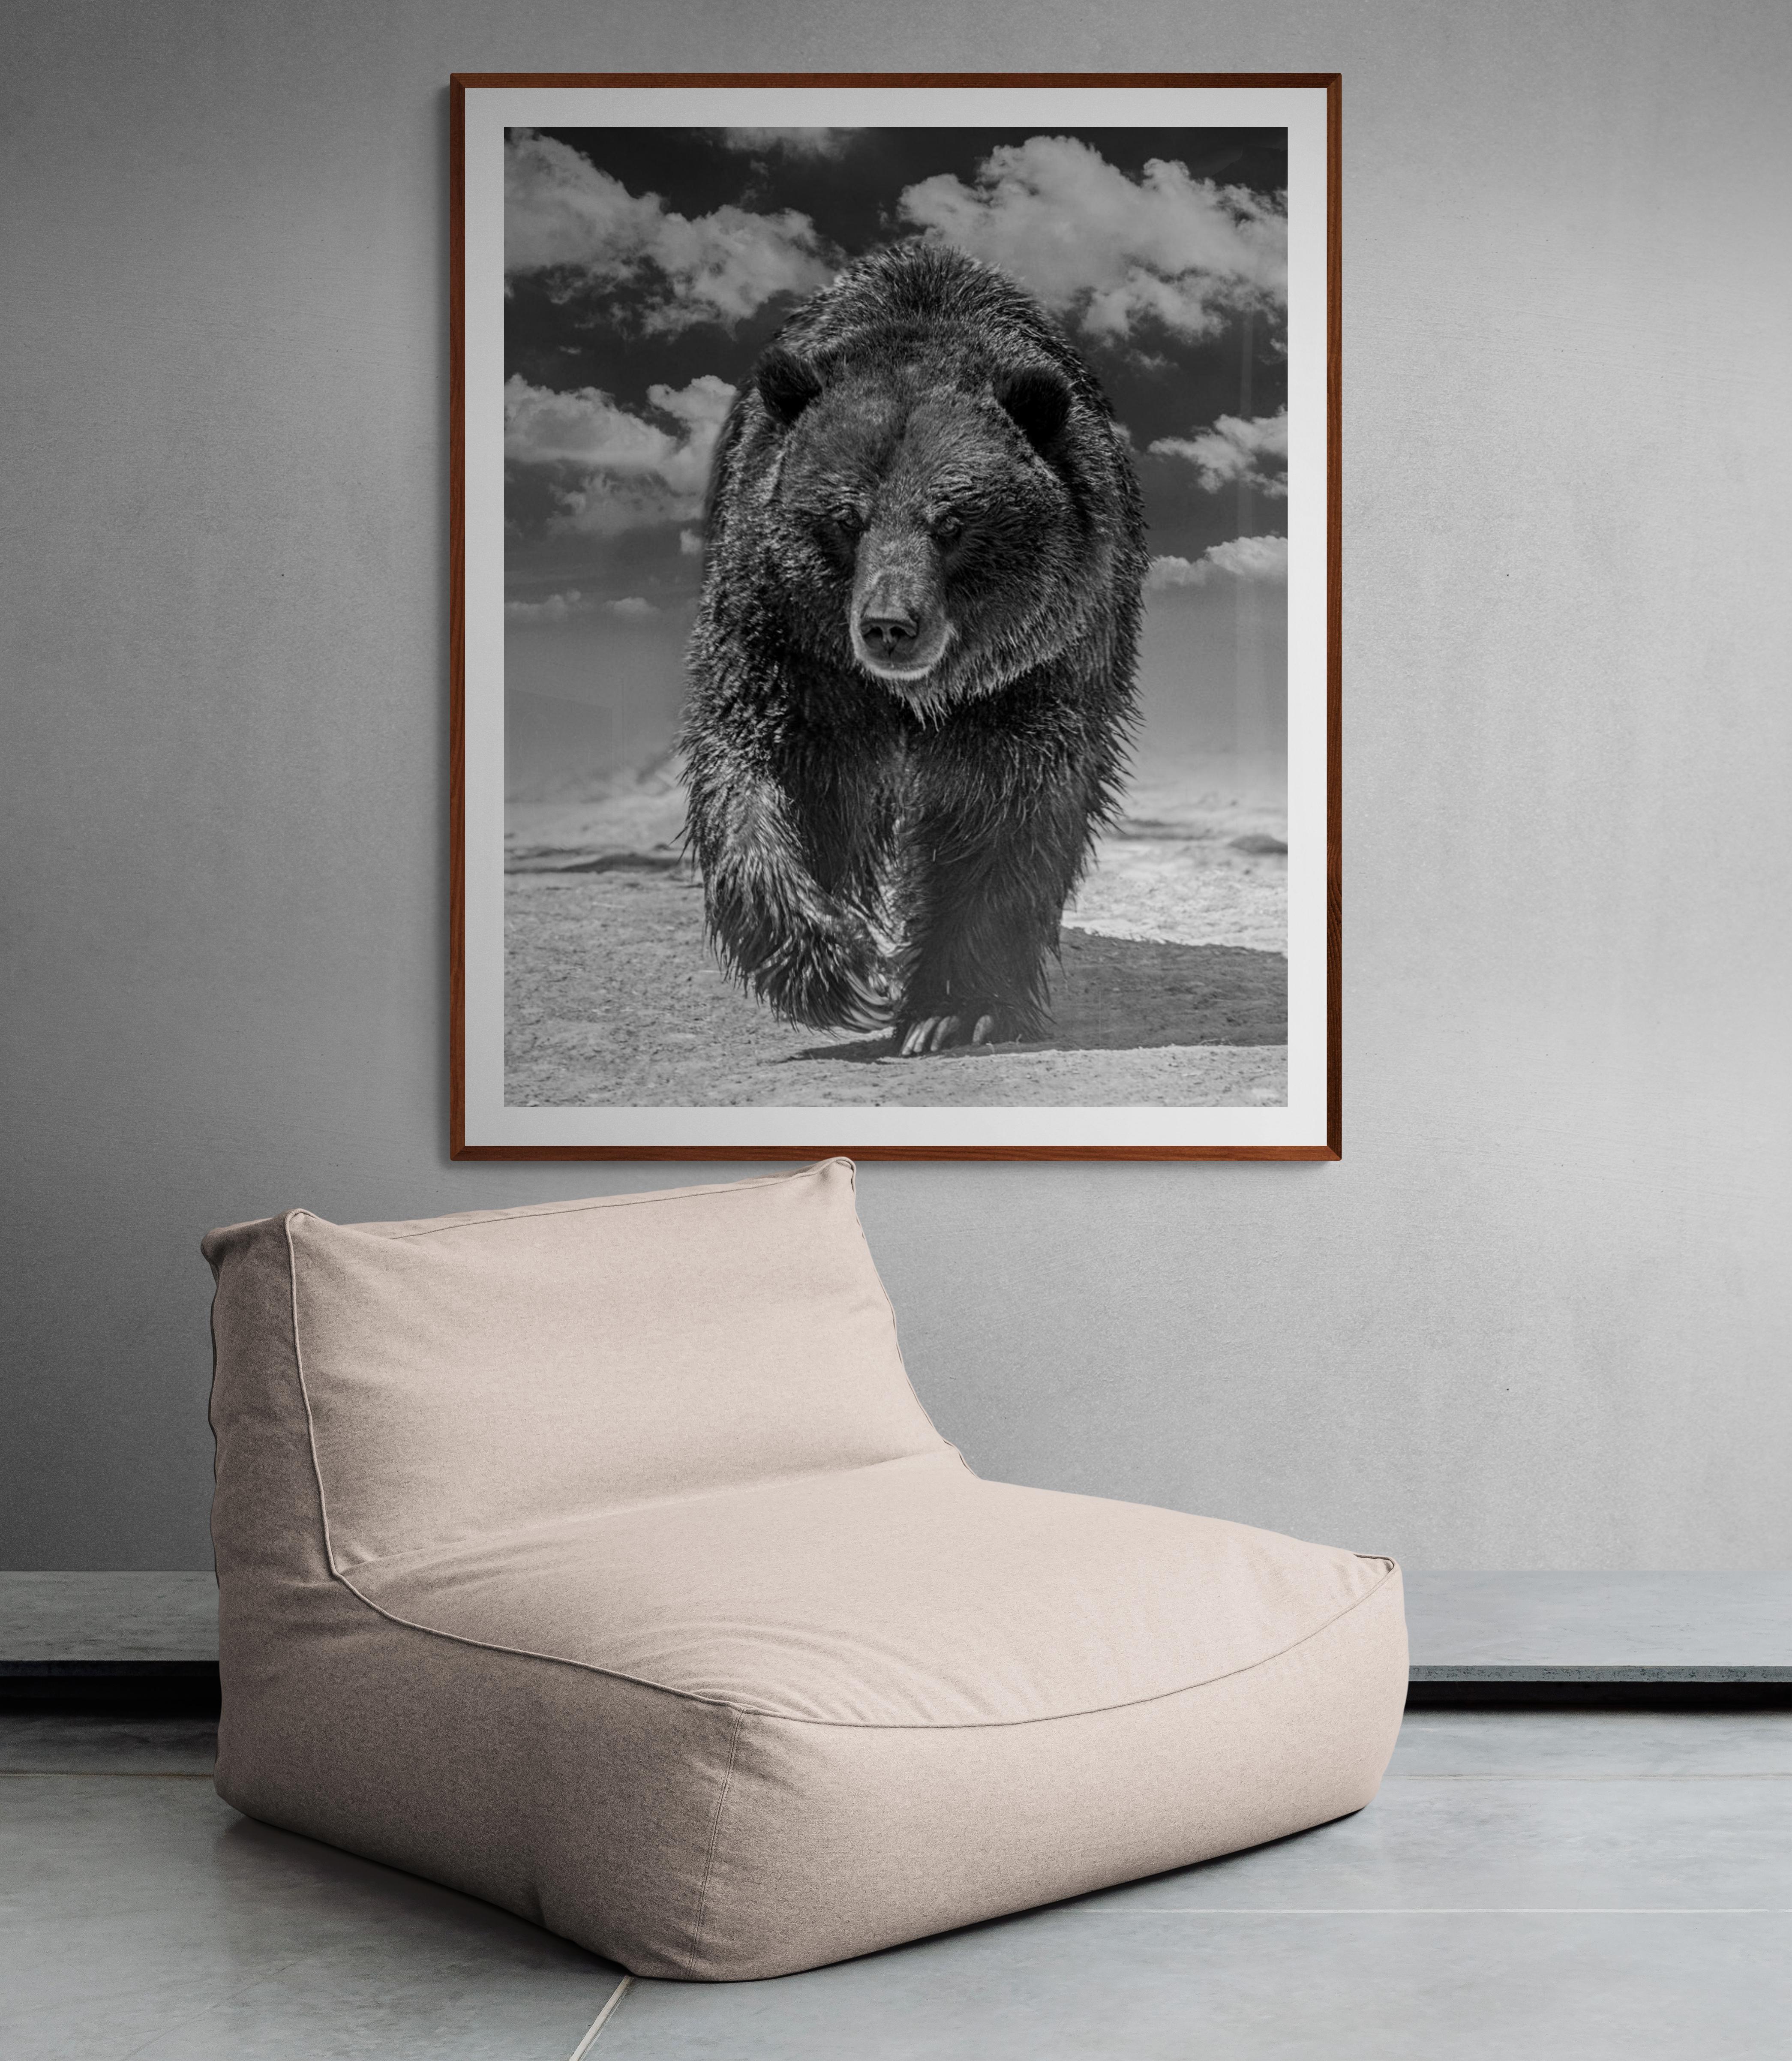 Grizzly Shores 36x48 Black & White Photography Grizzly Bear Photograph Fine Art 2